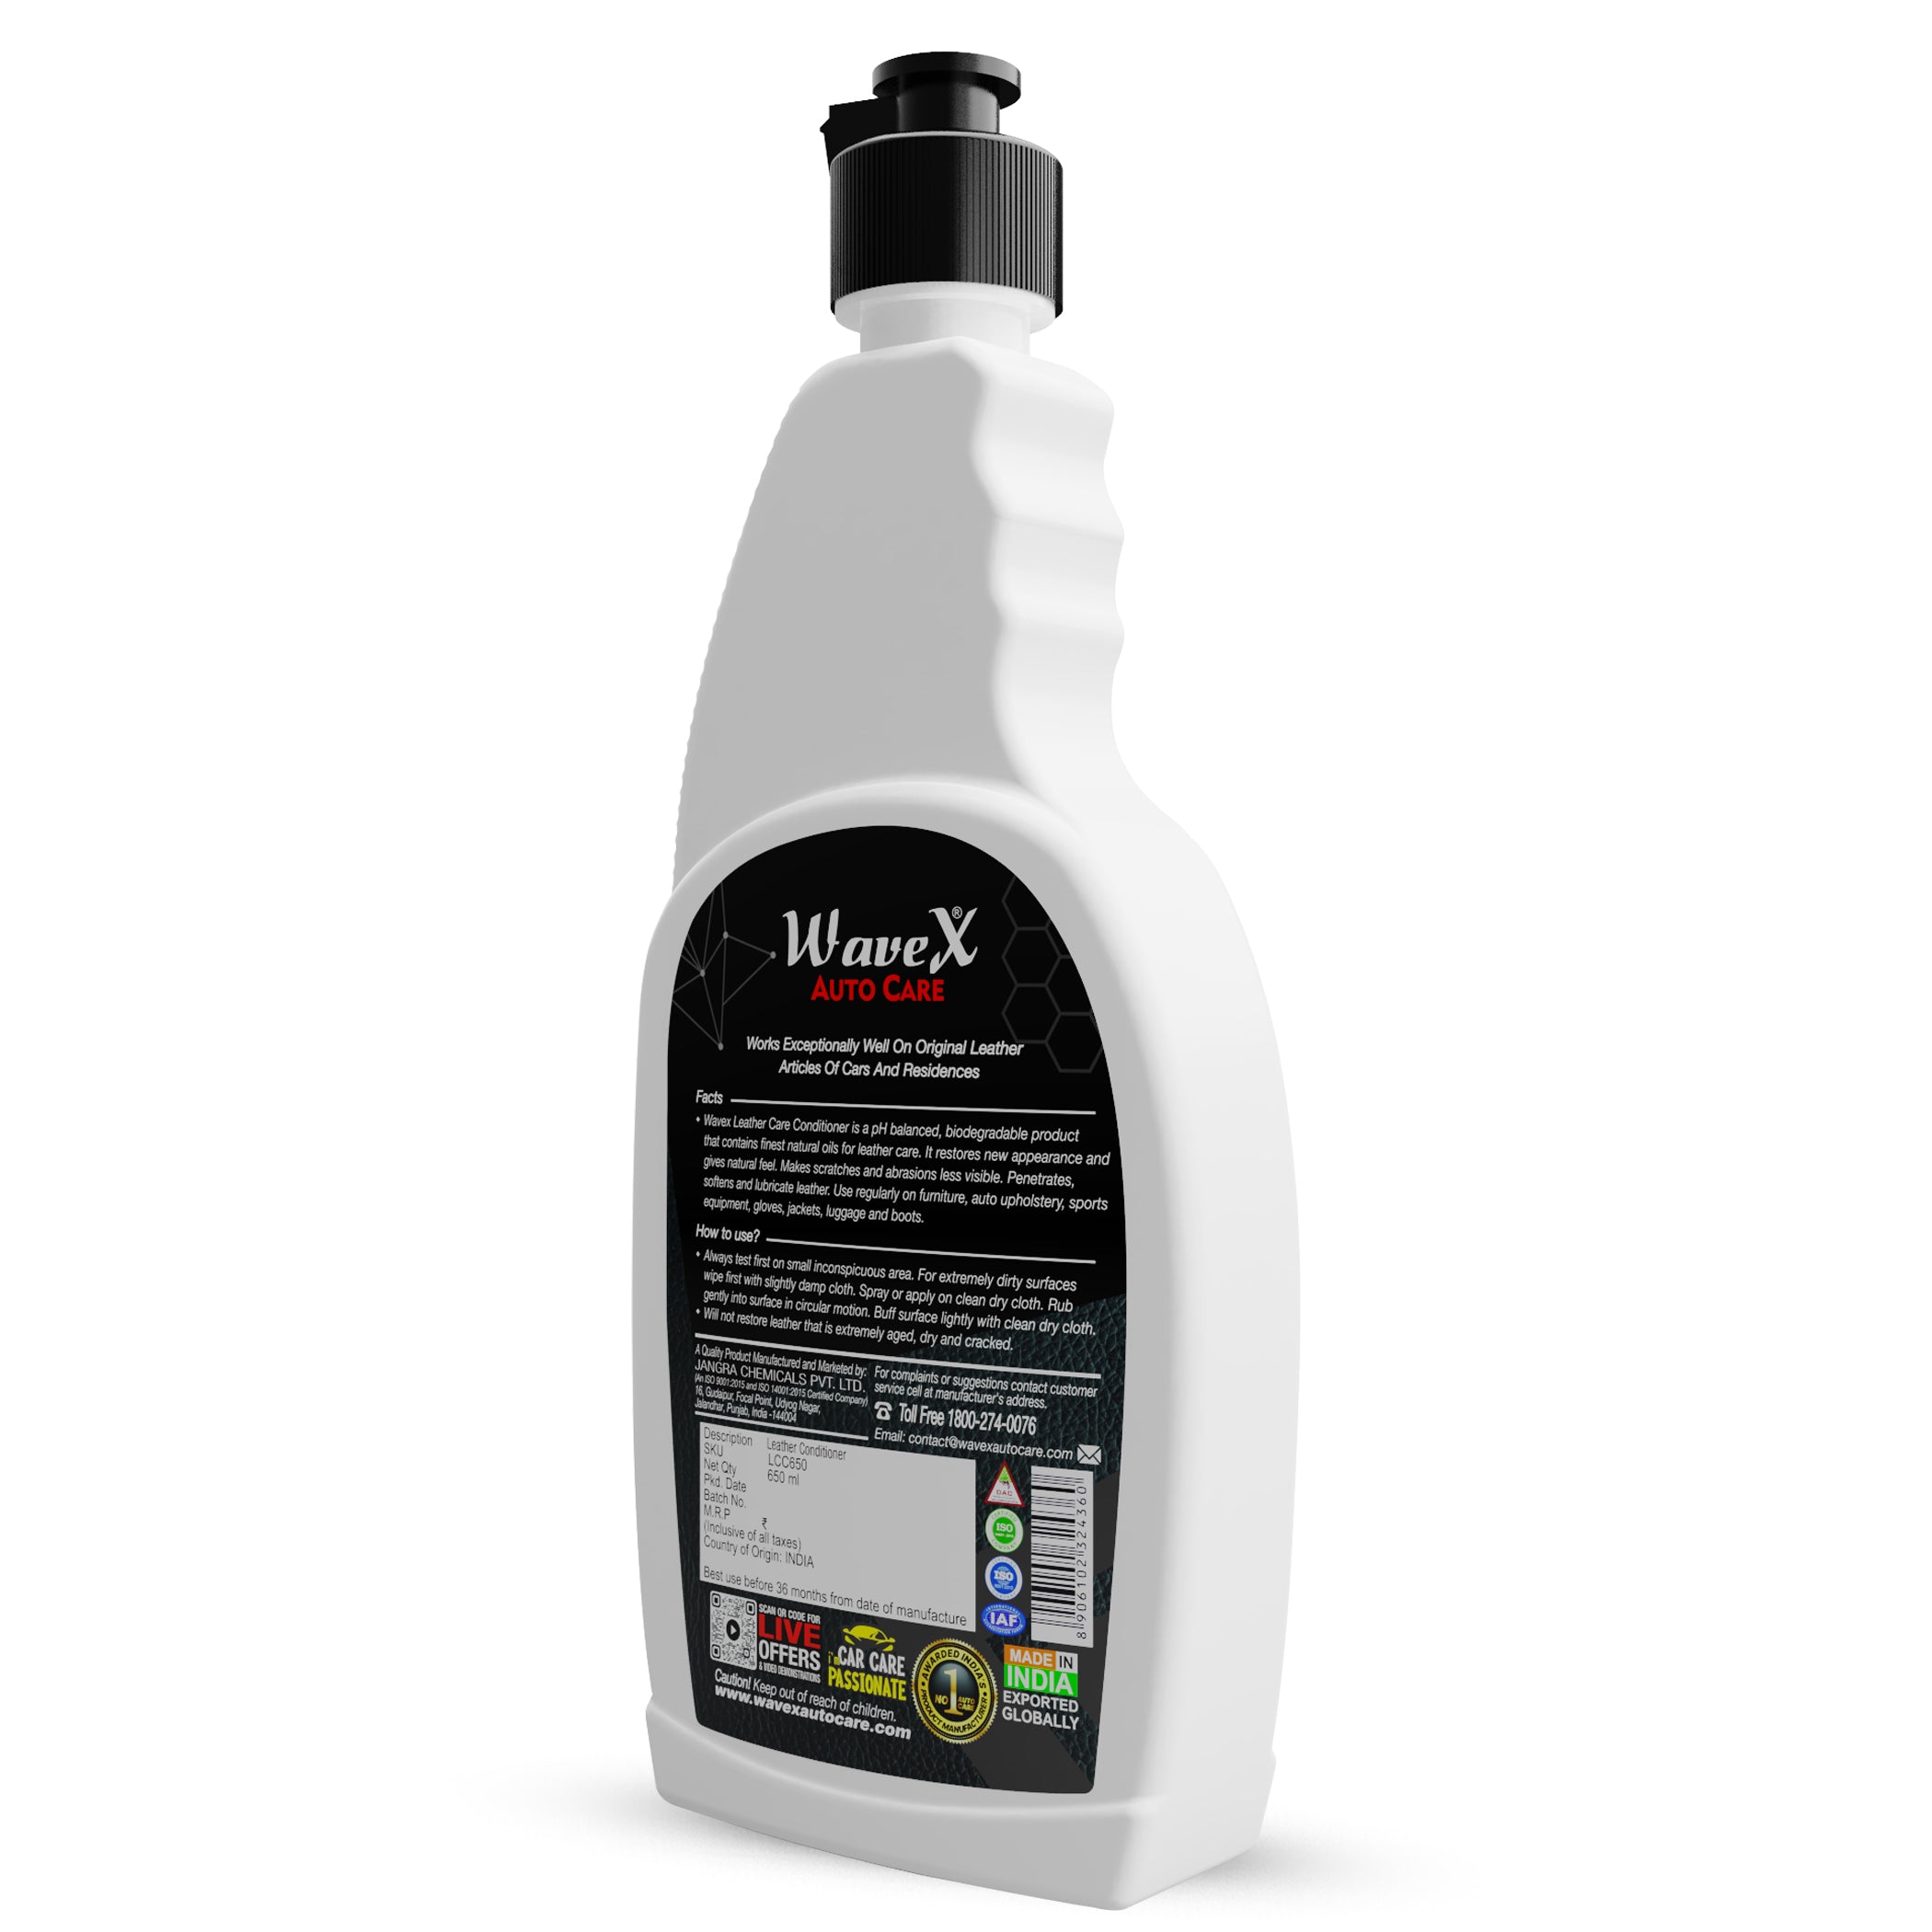 Leather Care - Cleaner and Conditioner, Leather Cleaner and Conditioner for Cars